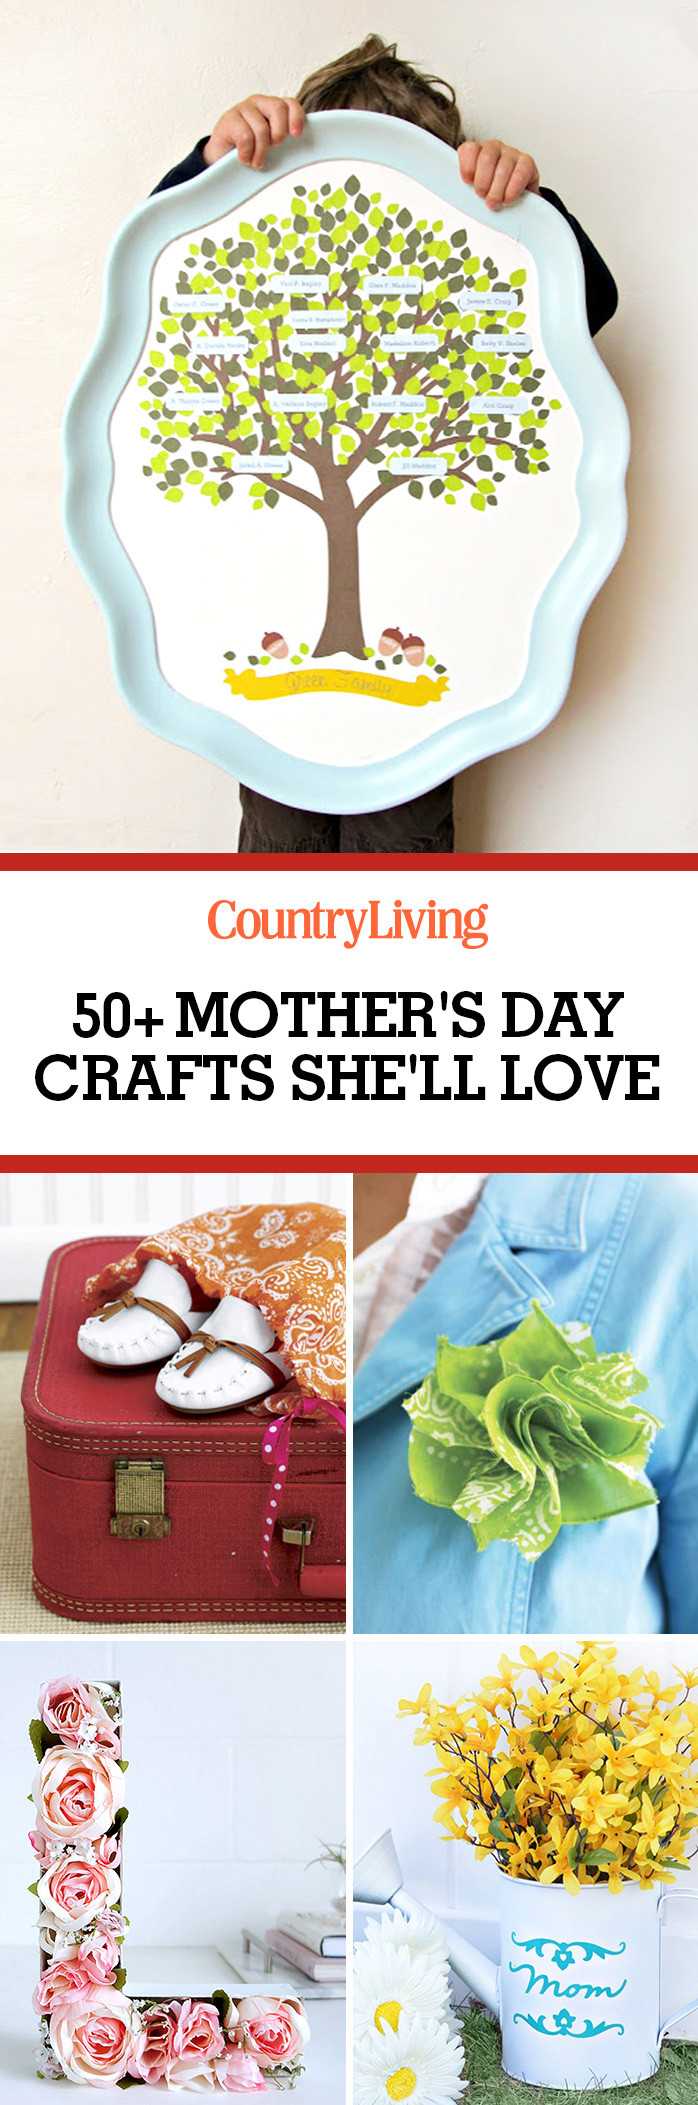 Crafty Gifts For Mom
 56 Easy Mothers Day Crafts DIY Gifts for Mom Ideas